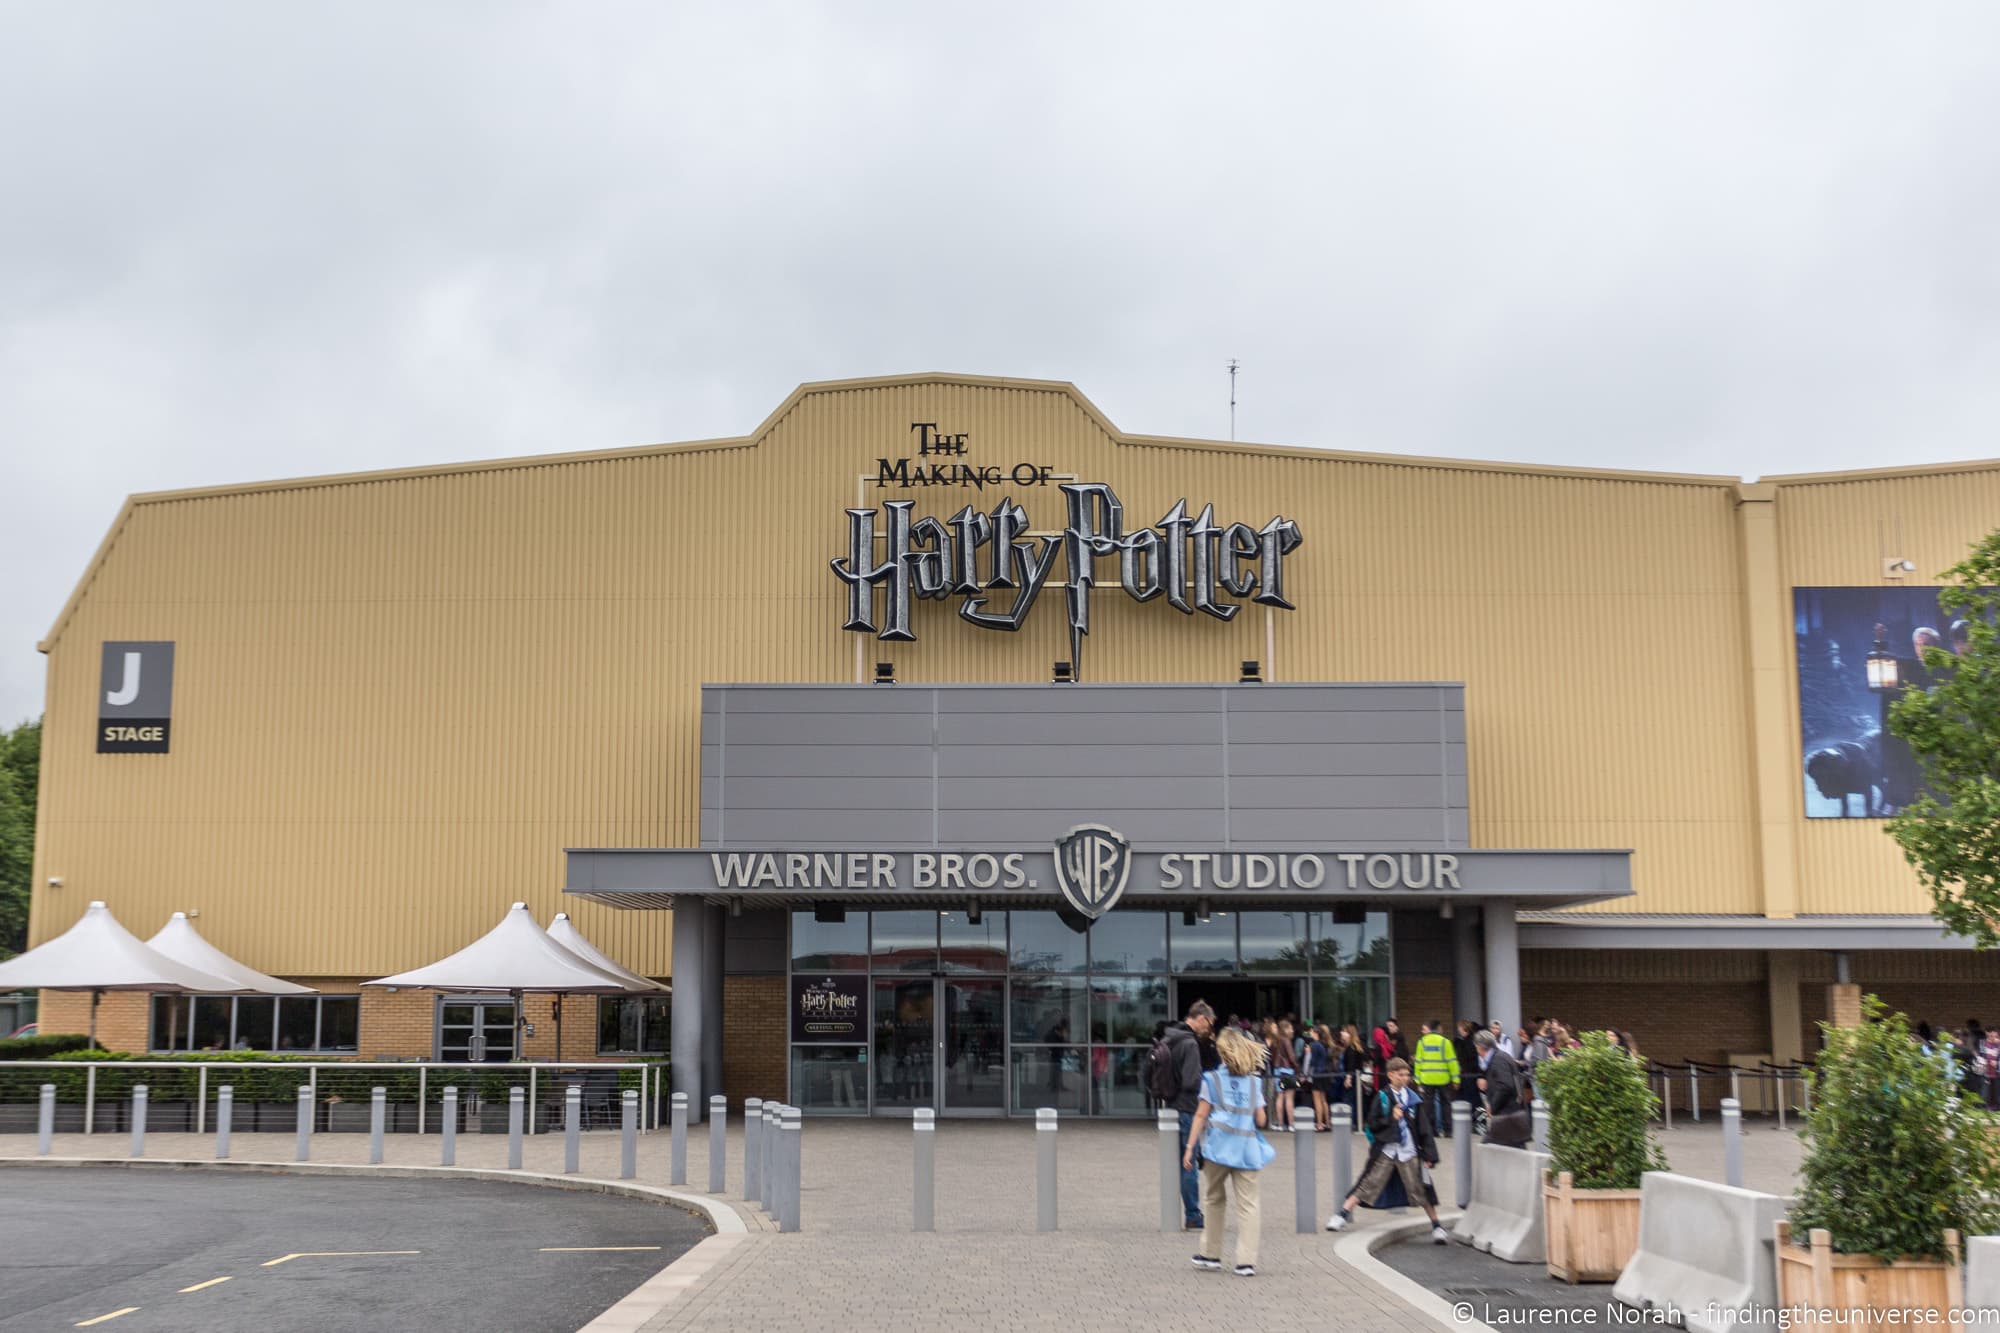 Visiting the Harry Potter Studio Tour London: Review, Tips and Guide!